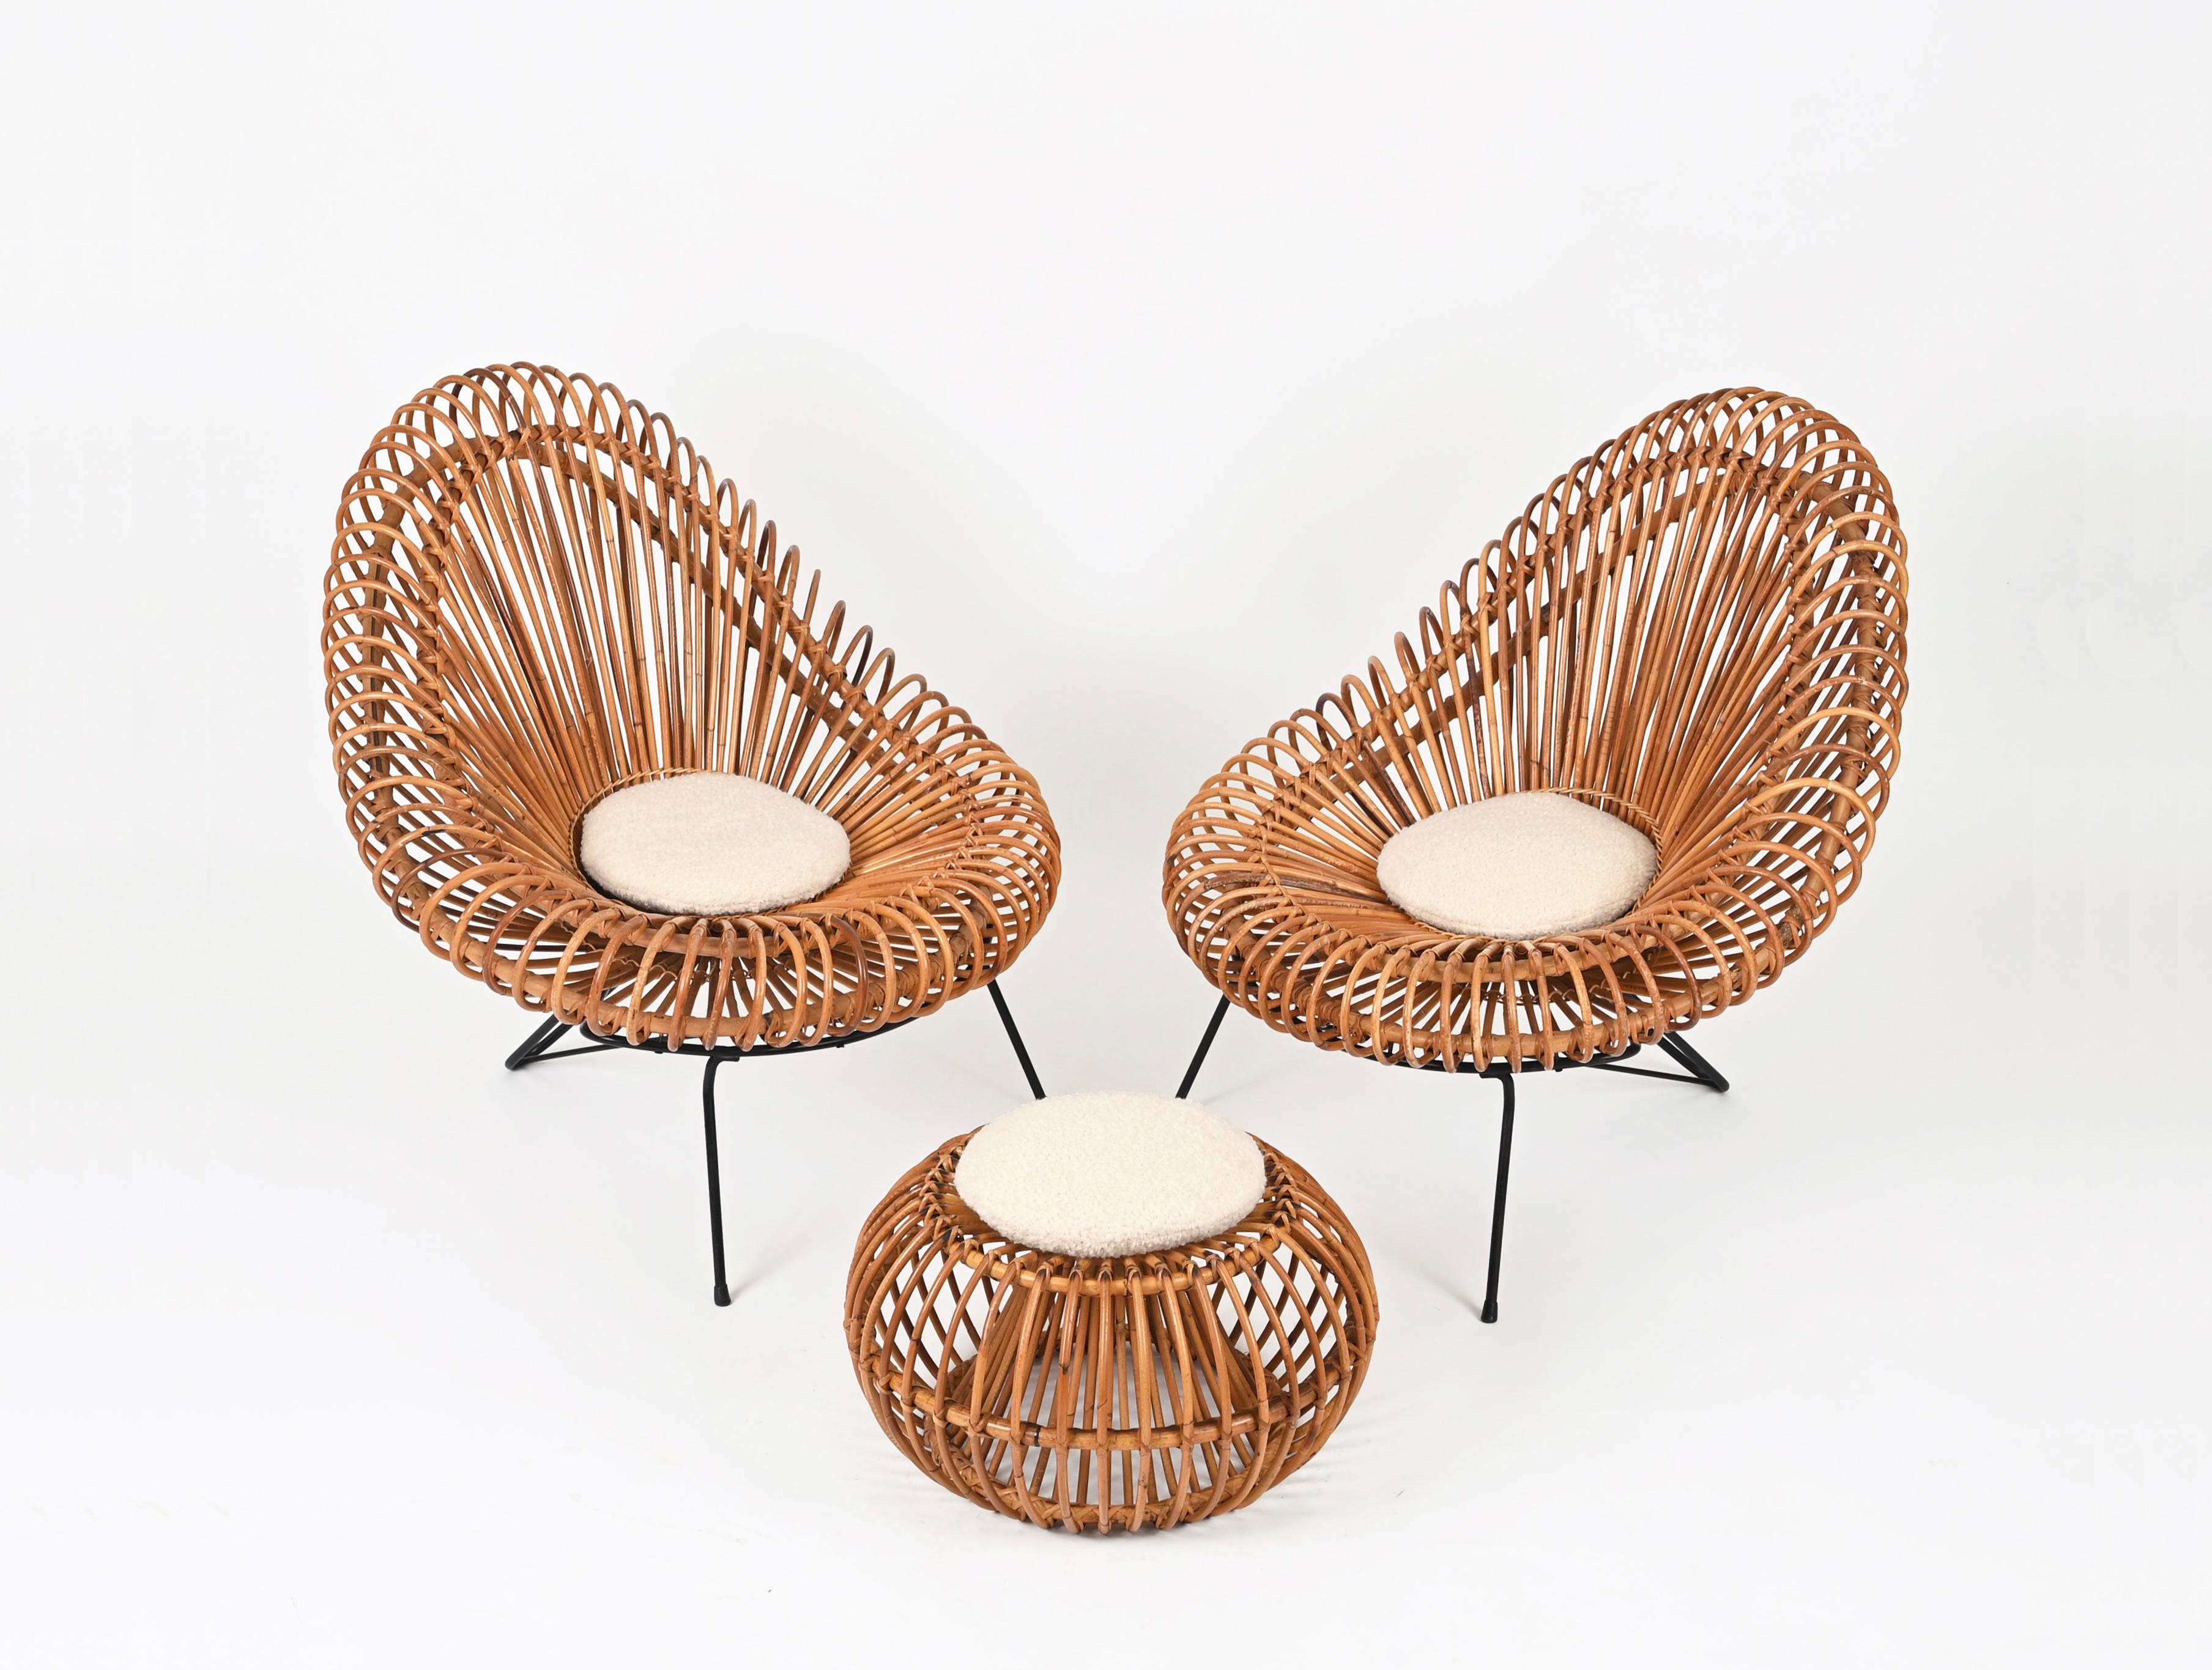 Living Room Rattan Set by Janine Abraham & Dirk Jan Rol - Chairs, Pouf, Mirror  For Sale 11